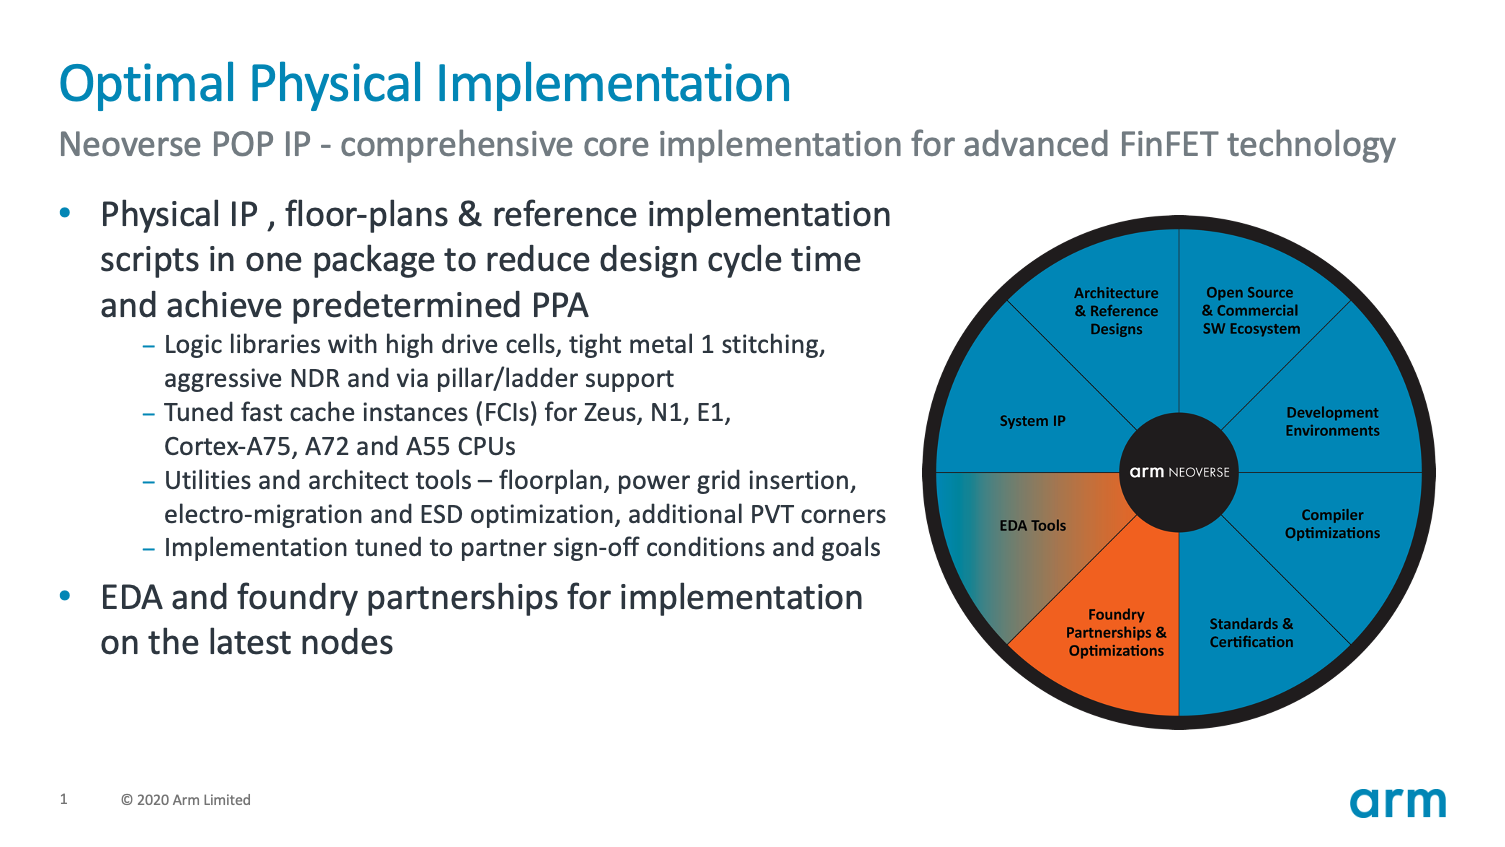  A graphic of optimal physical implementation.